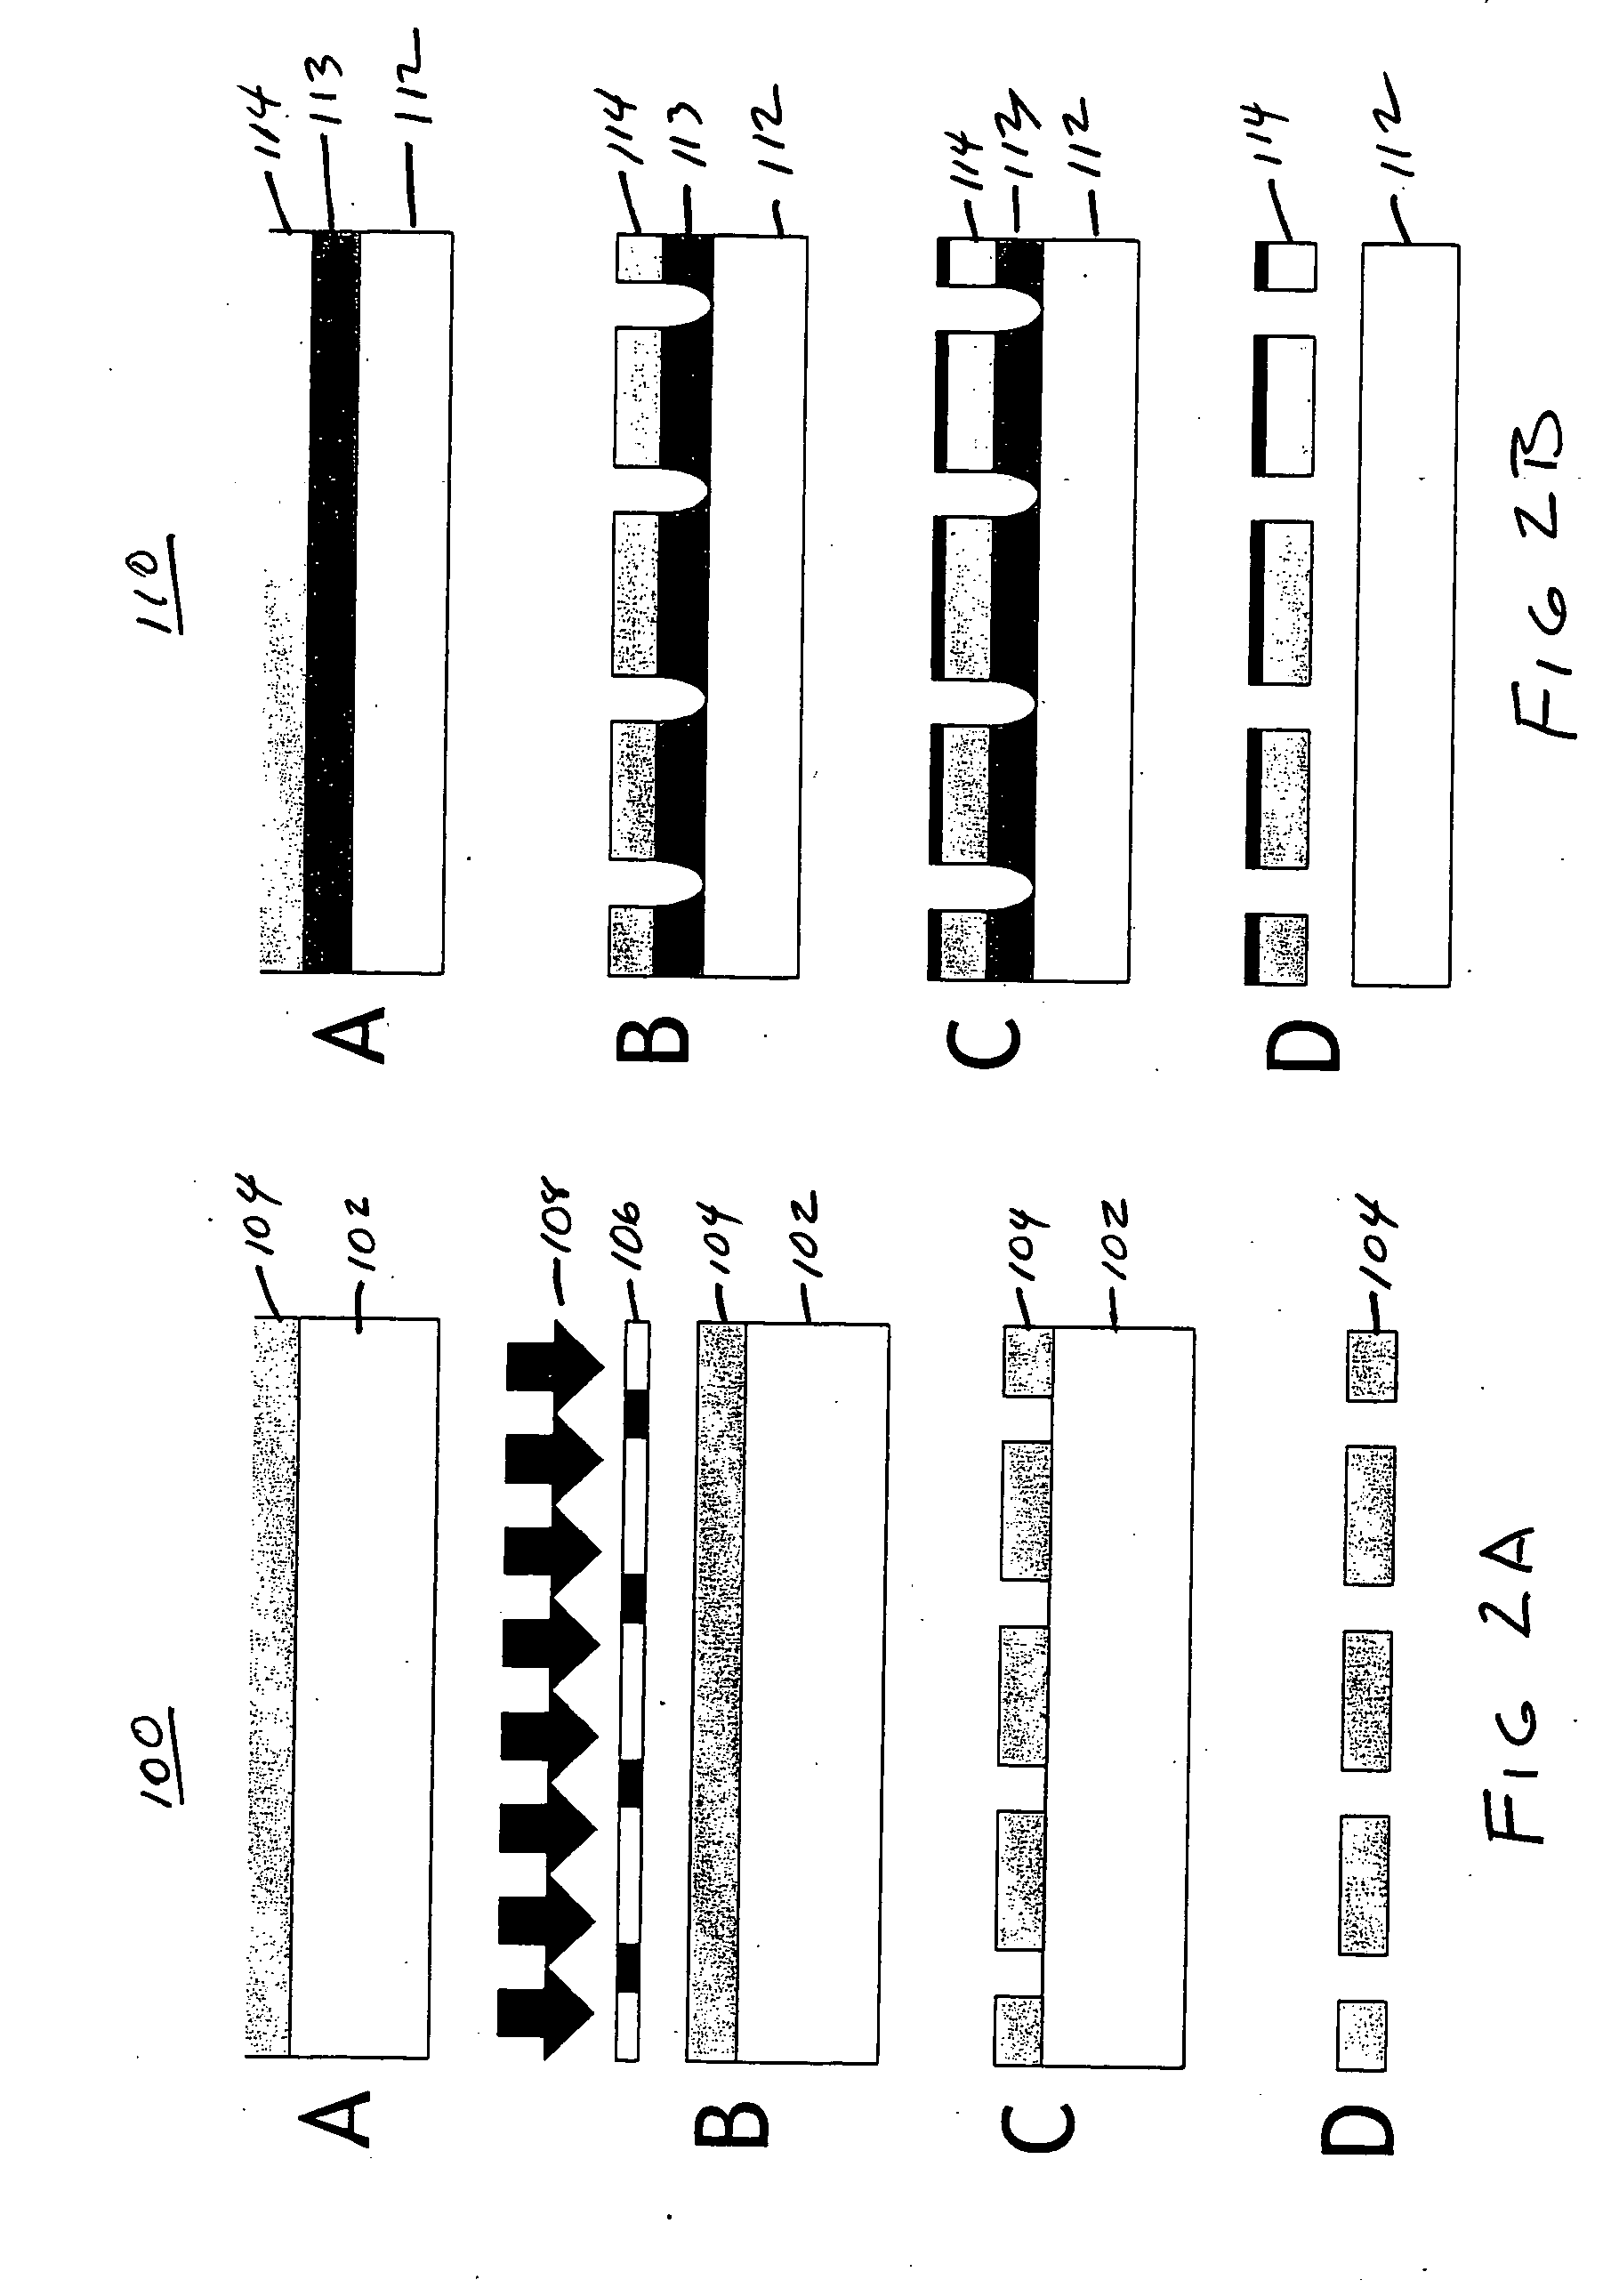 Automated, programmable, high throughput, multiplexed assay system for cellular and biological assays